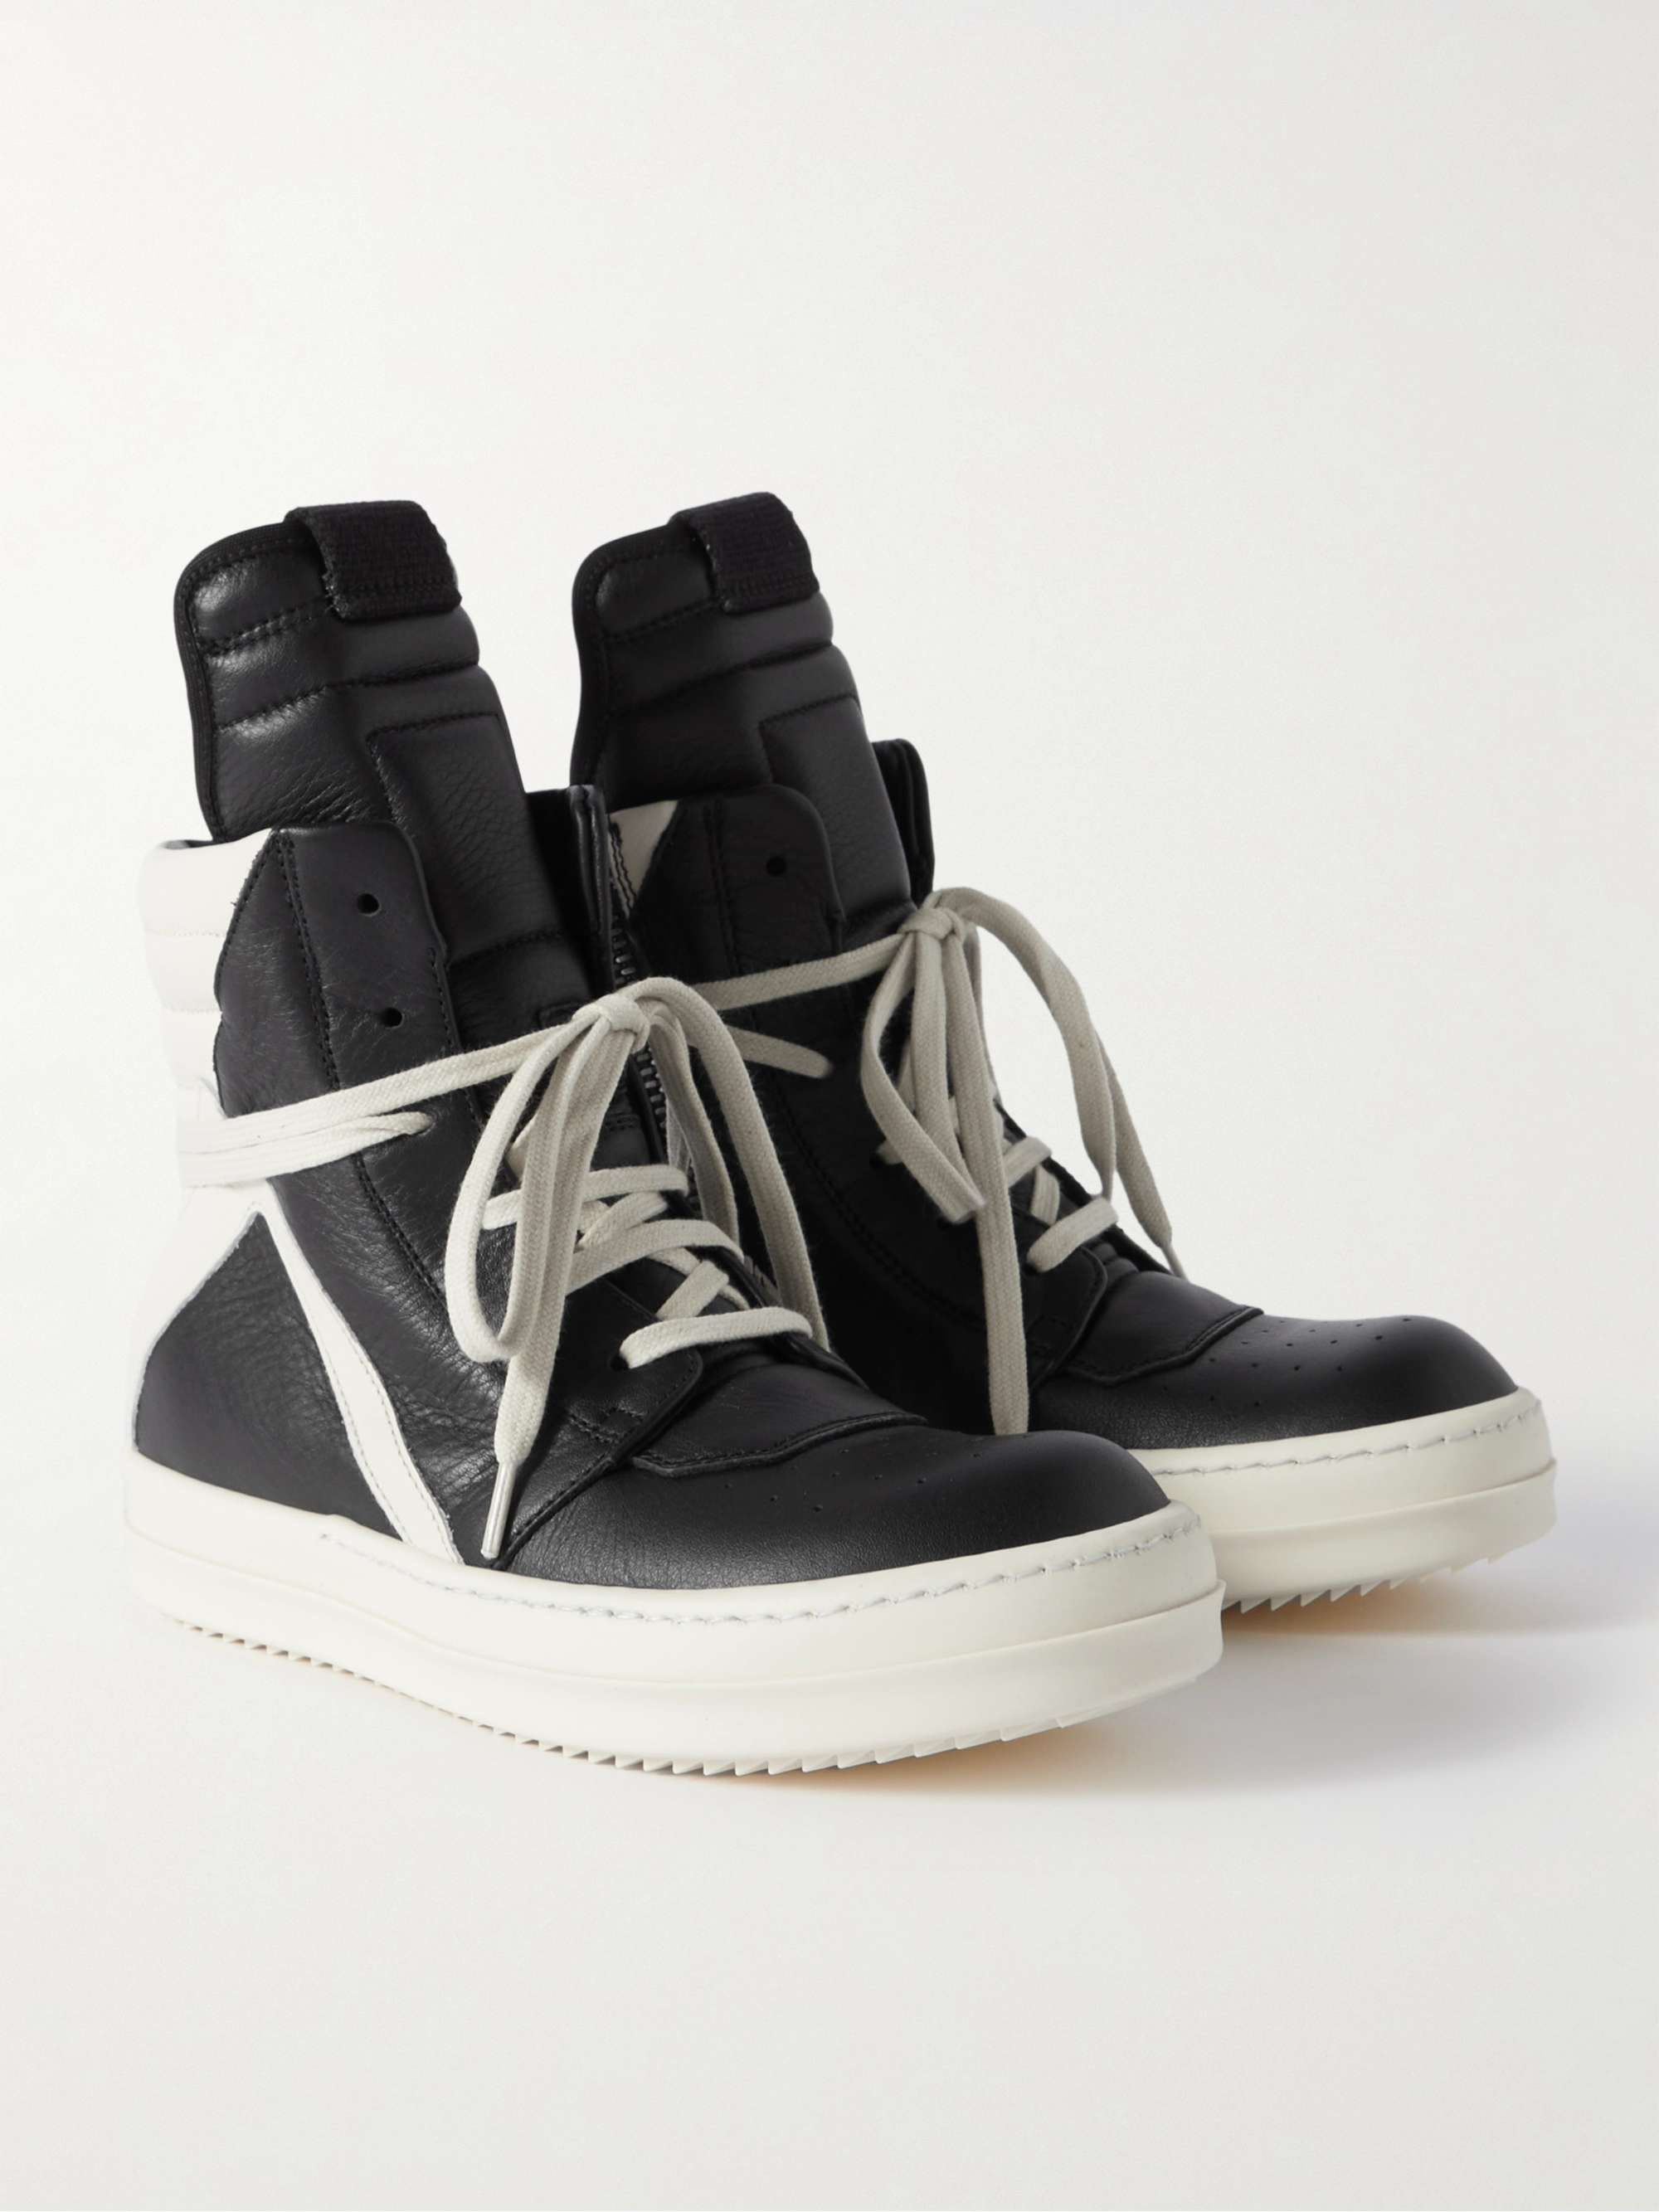 RICK OWENS KIDS Geobasket Two-Tone Leather High-Top Sneakers for Men ...